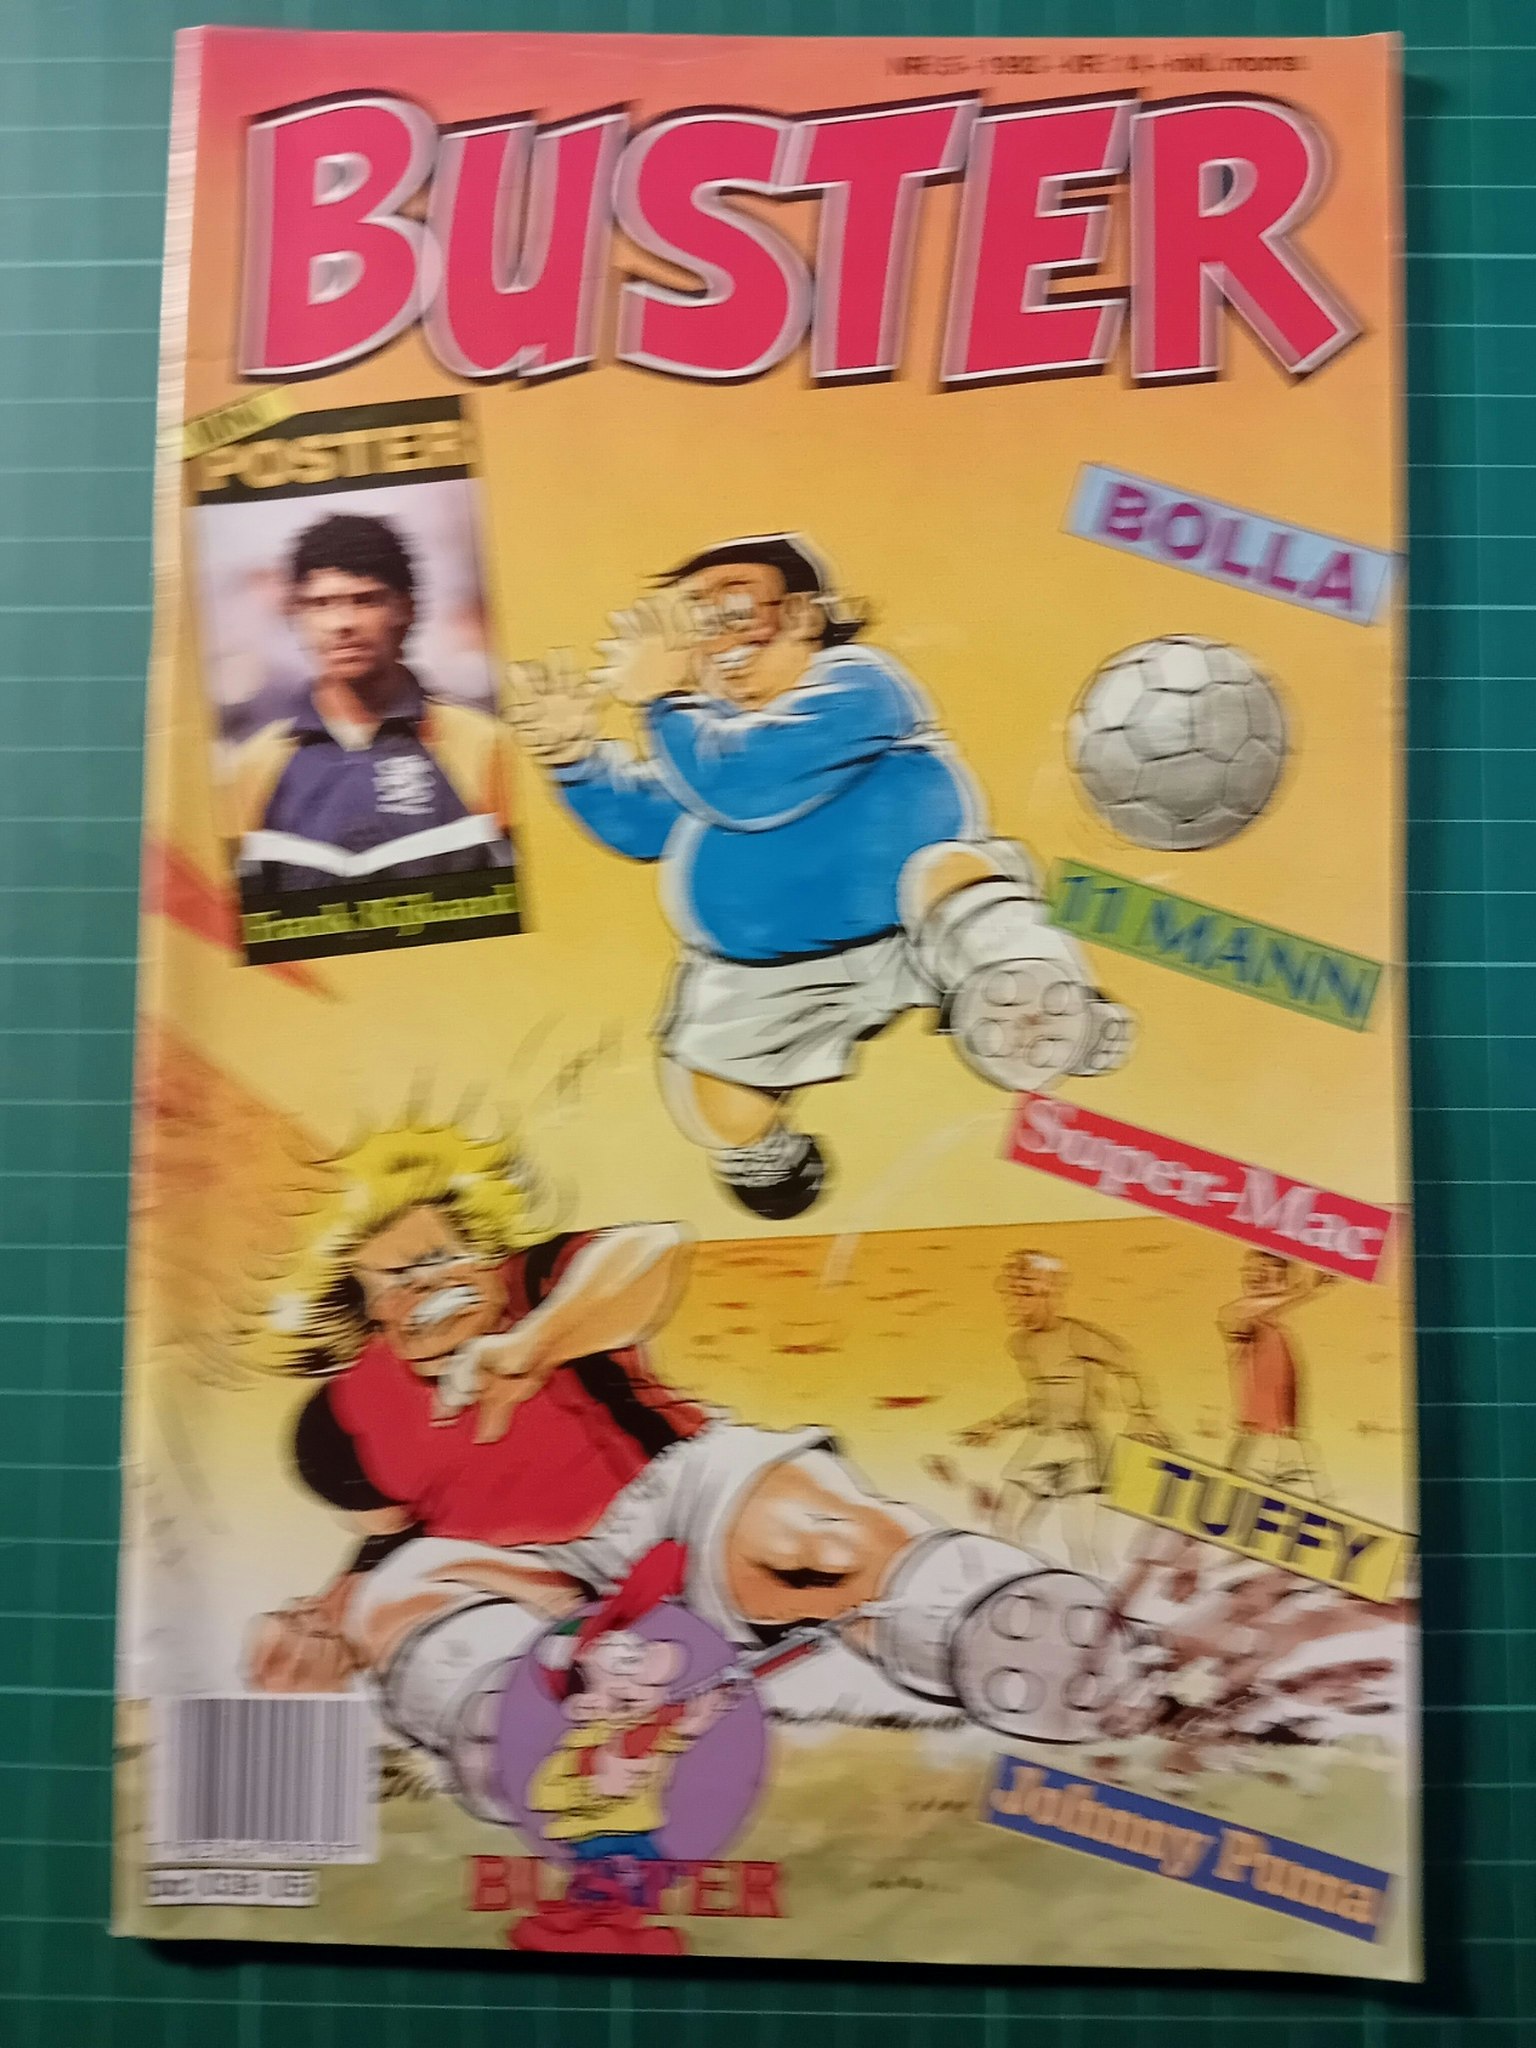 Buster 1992 - 05